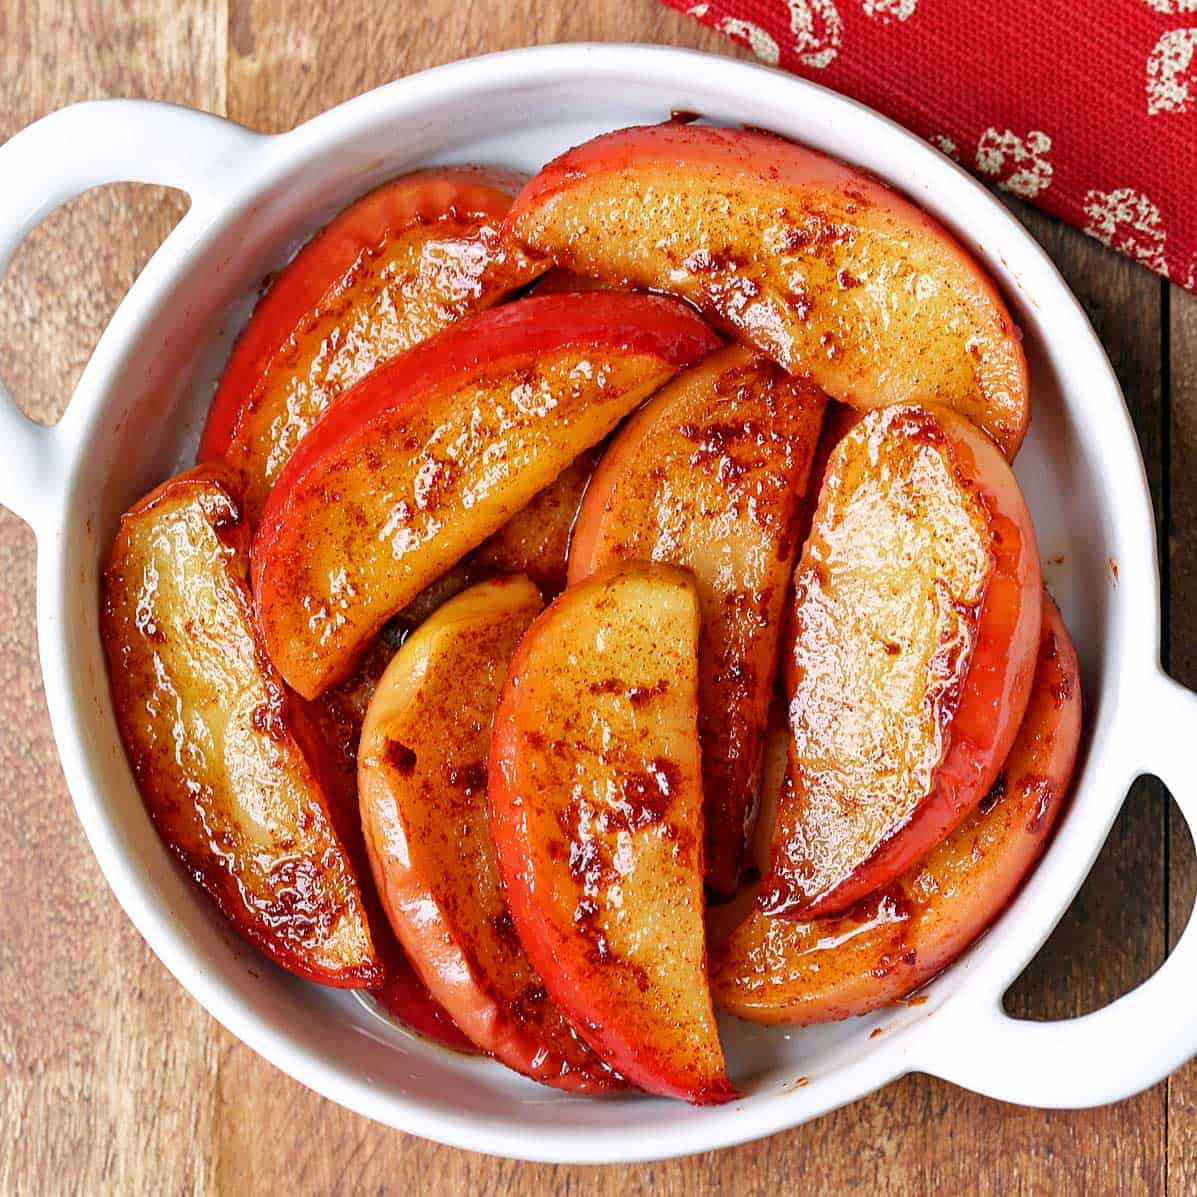 Baked apple slices are served in a white bowl.